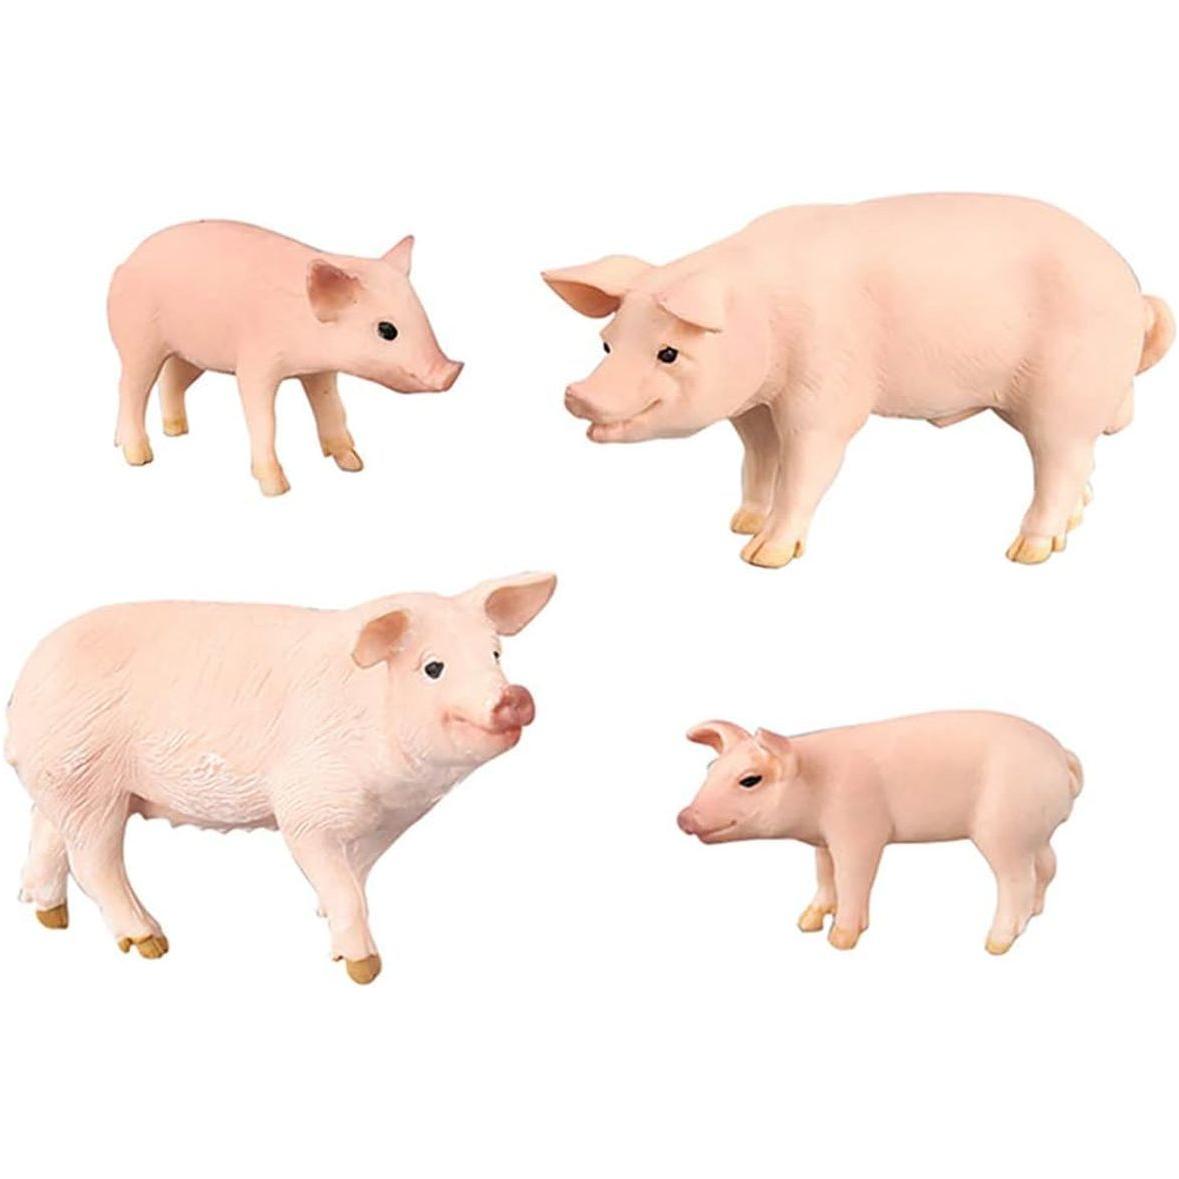 4 Pcs Realistic Farm Pig Animals Model Figure Toy Set, Barn Farm Pig Family Figurines Collection Playset Preschool Science Educational Learn Cognitive Props